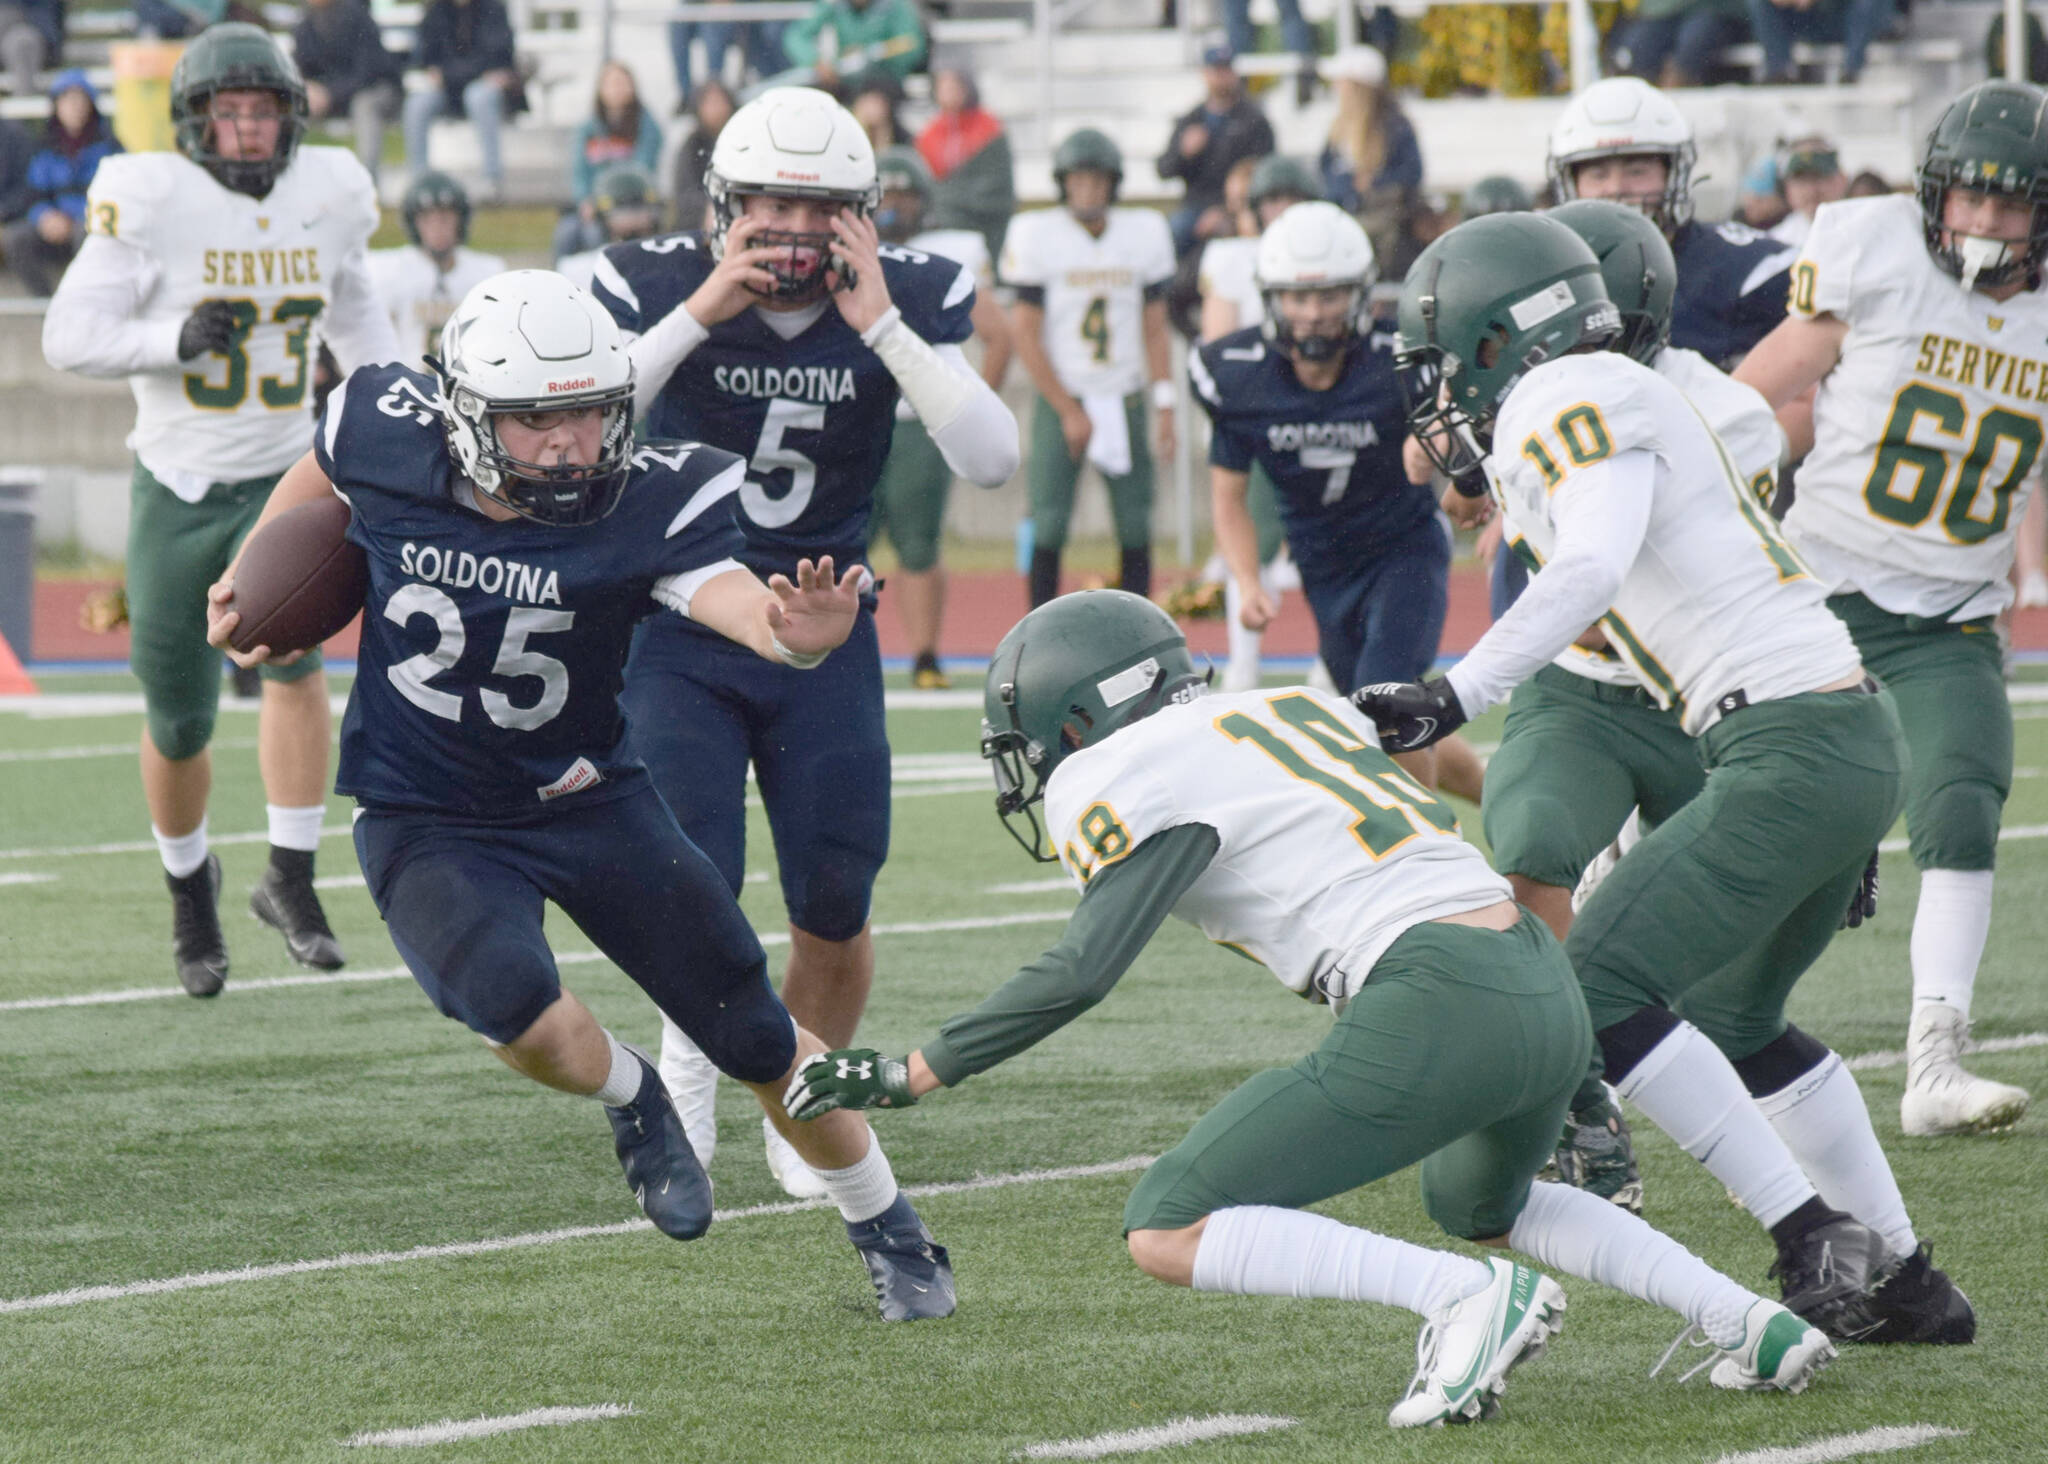 Soldotna’s Gehret Medcoff rushes against Service at Justin Maile Field on Friday, Sept. 3, 2021, in Soldotna, Alaska. (Photo by Camille Botello/Peninsula Clarion)